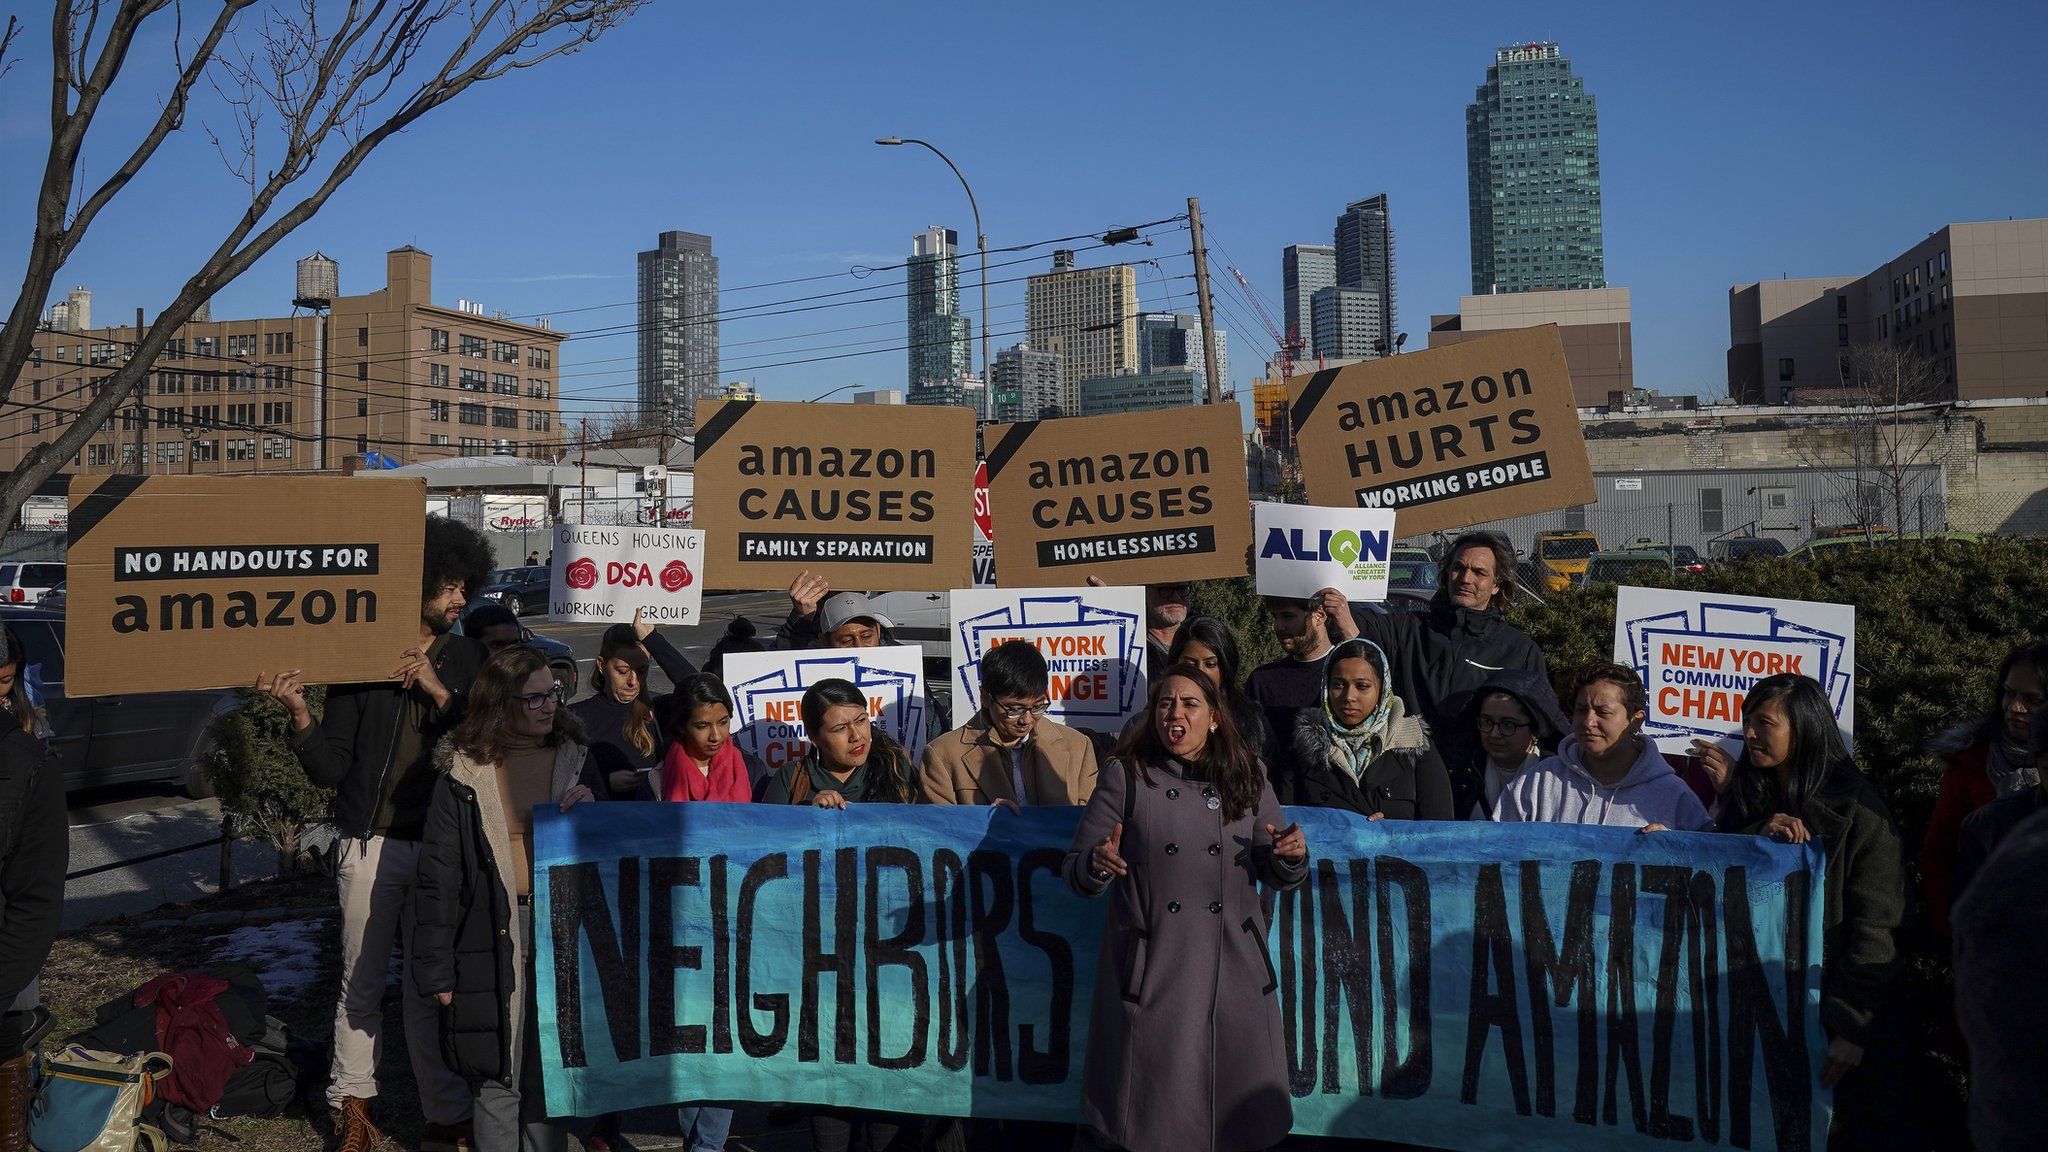 Activists and community members who opposed Amazon"s plan to move into Queens rally in celebration of Amazon"s decision to pull out of the deal, in the Long Island City neighborhood, February 14, 2019 in the Queens borough of New York City.